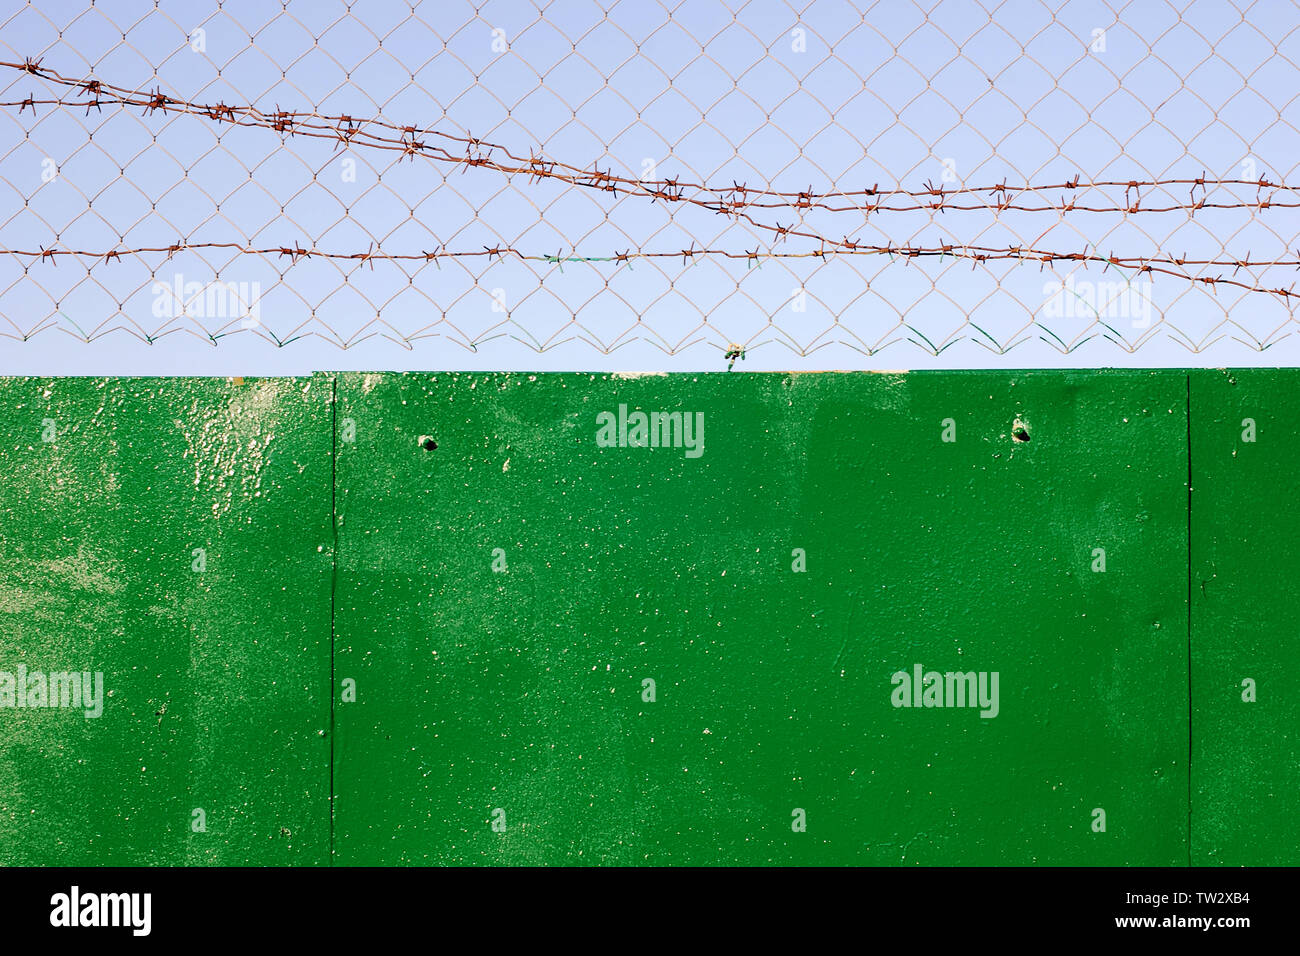 Fence topped with chain-link and barbed wire against clear sky, metal surface roughly painted with green paint Stock Photo